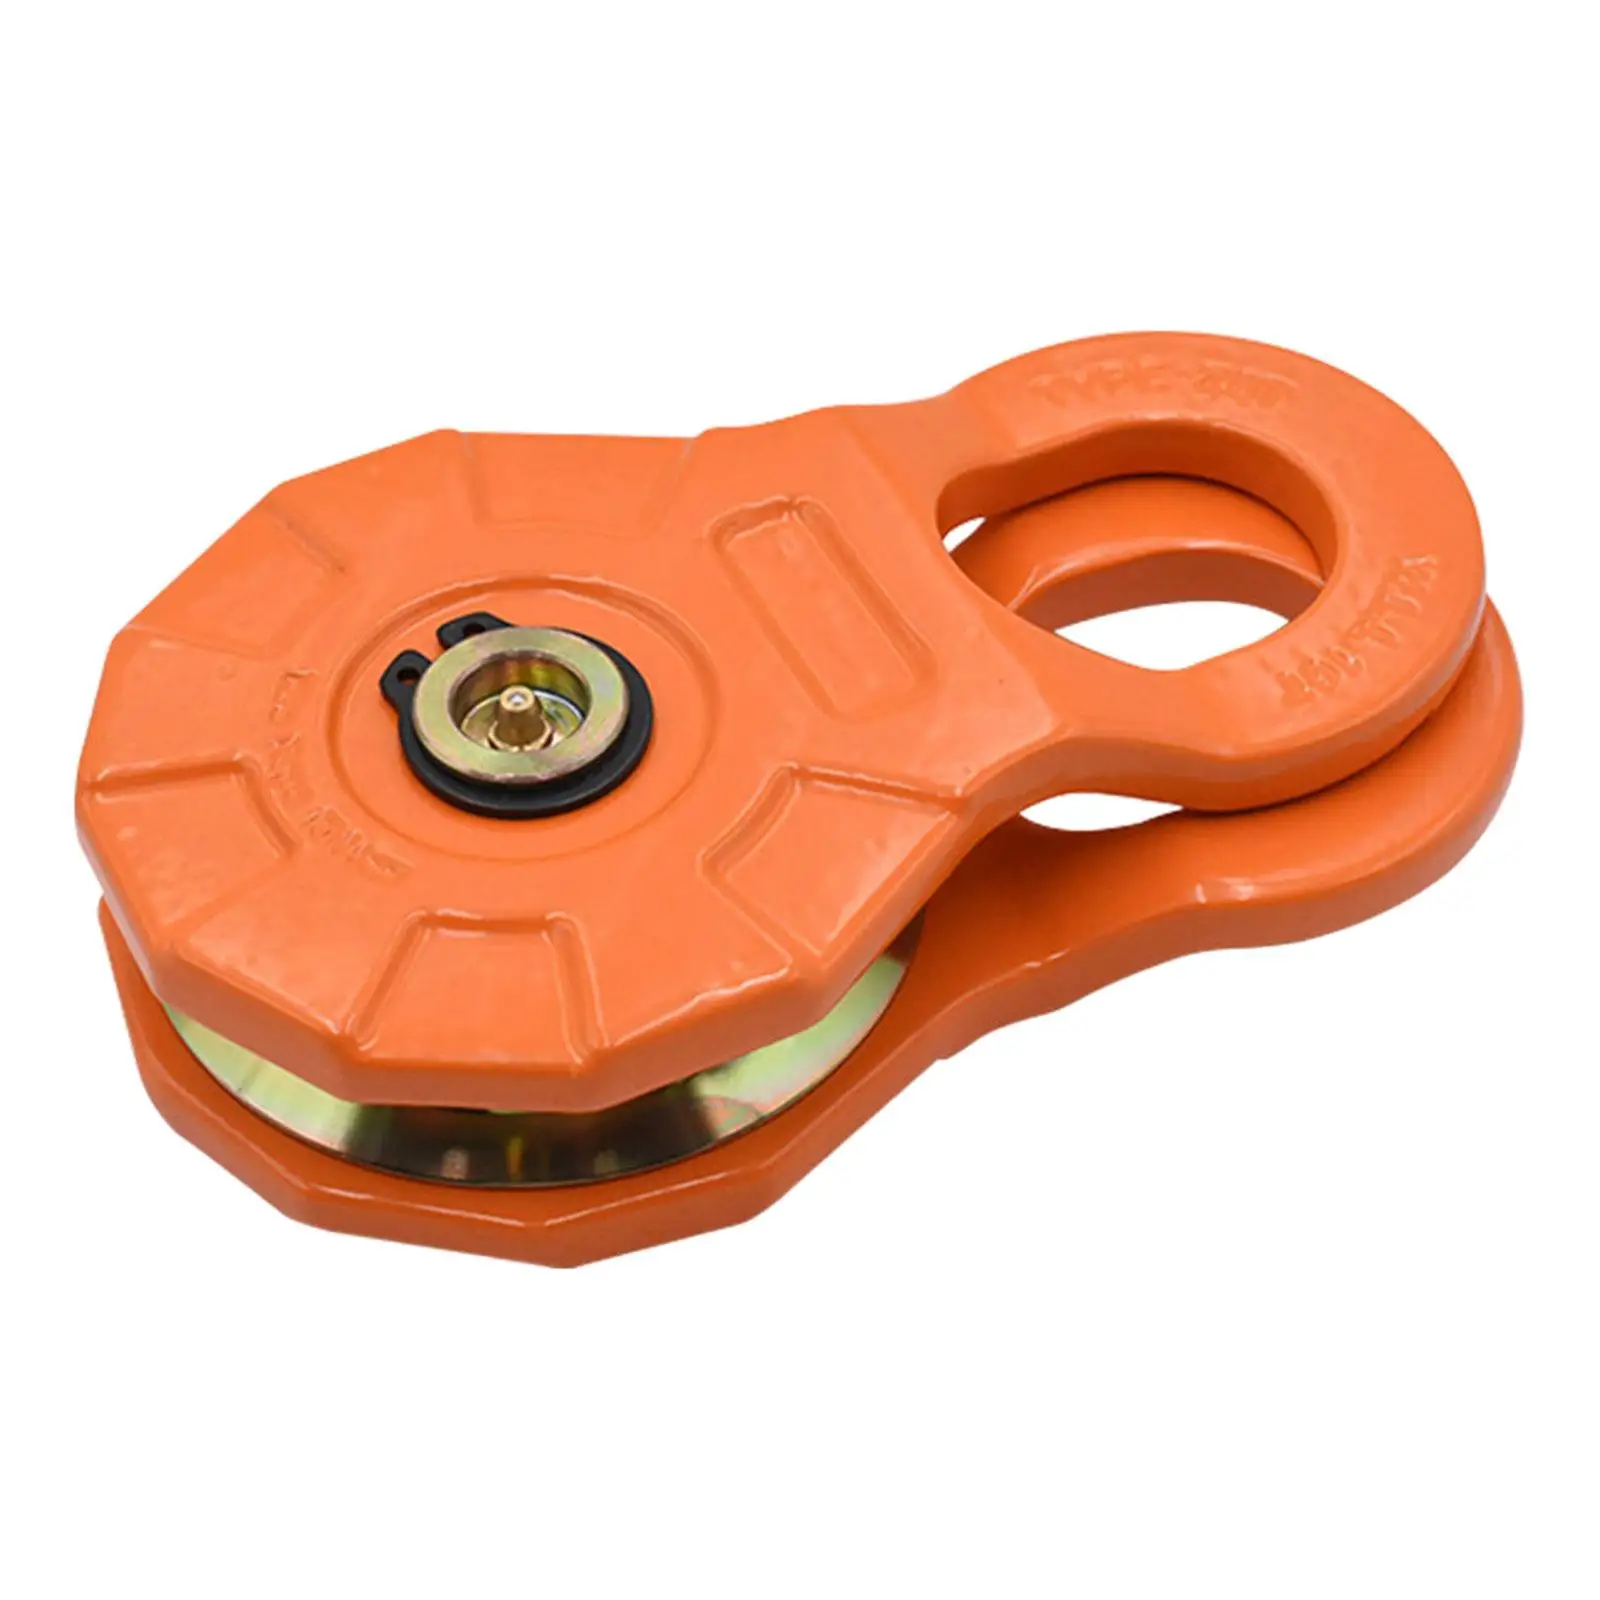 Snatch Block Recover Winch Pulley 22000 lbs Capacity for Vehicle Hauling